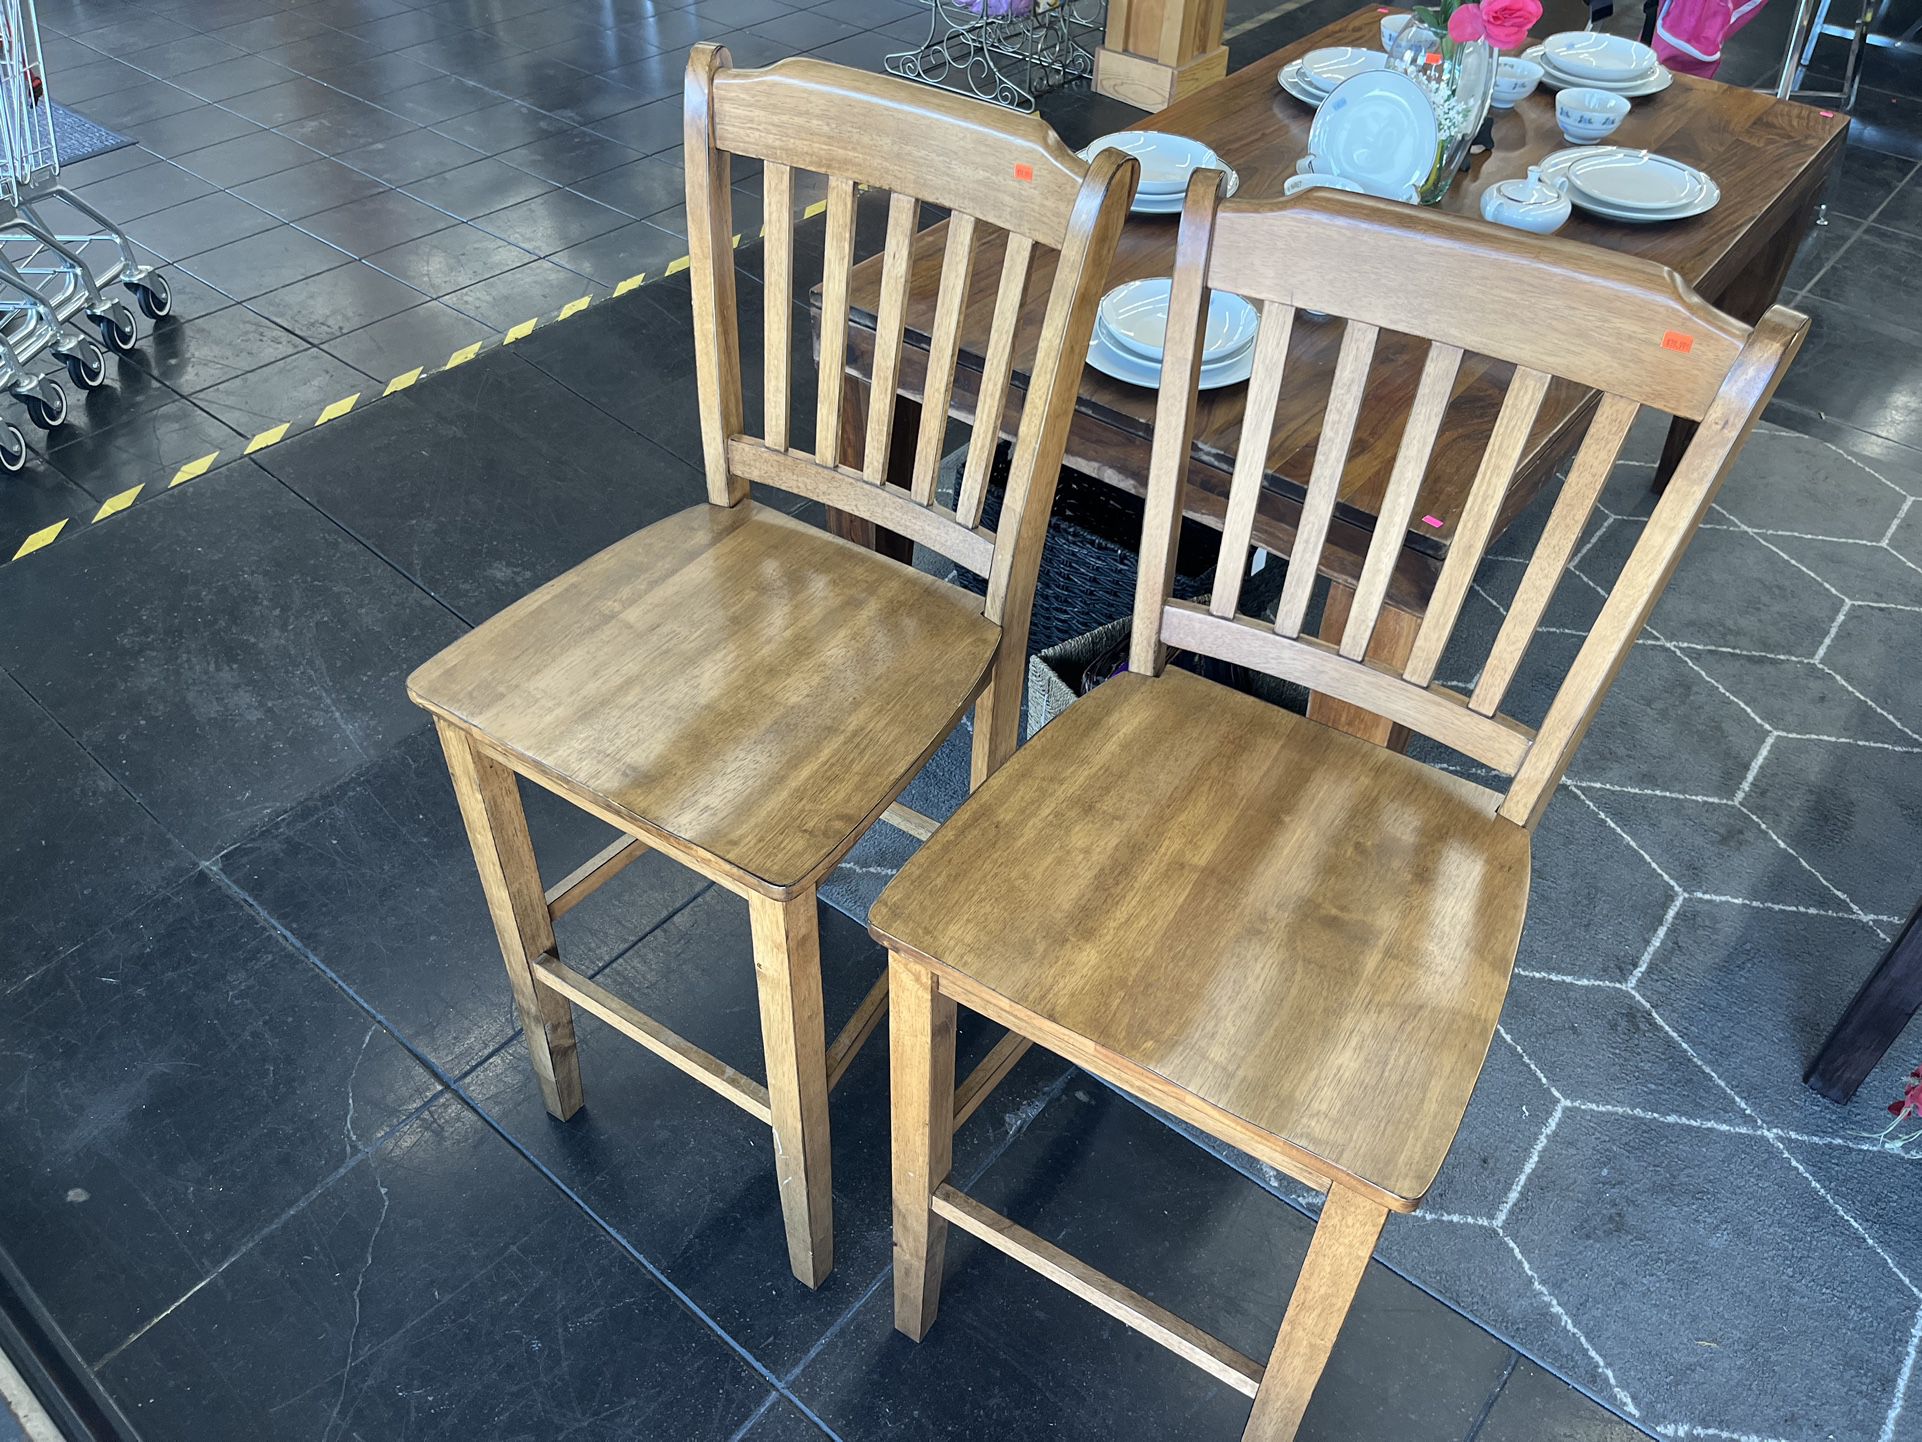 Sturdy Wooden Chair $40 Ea